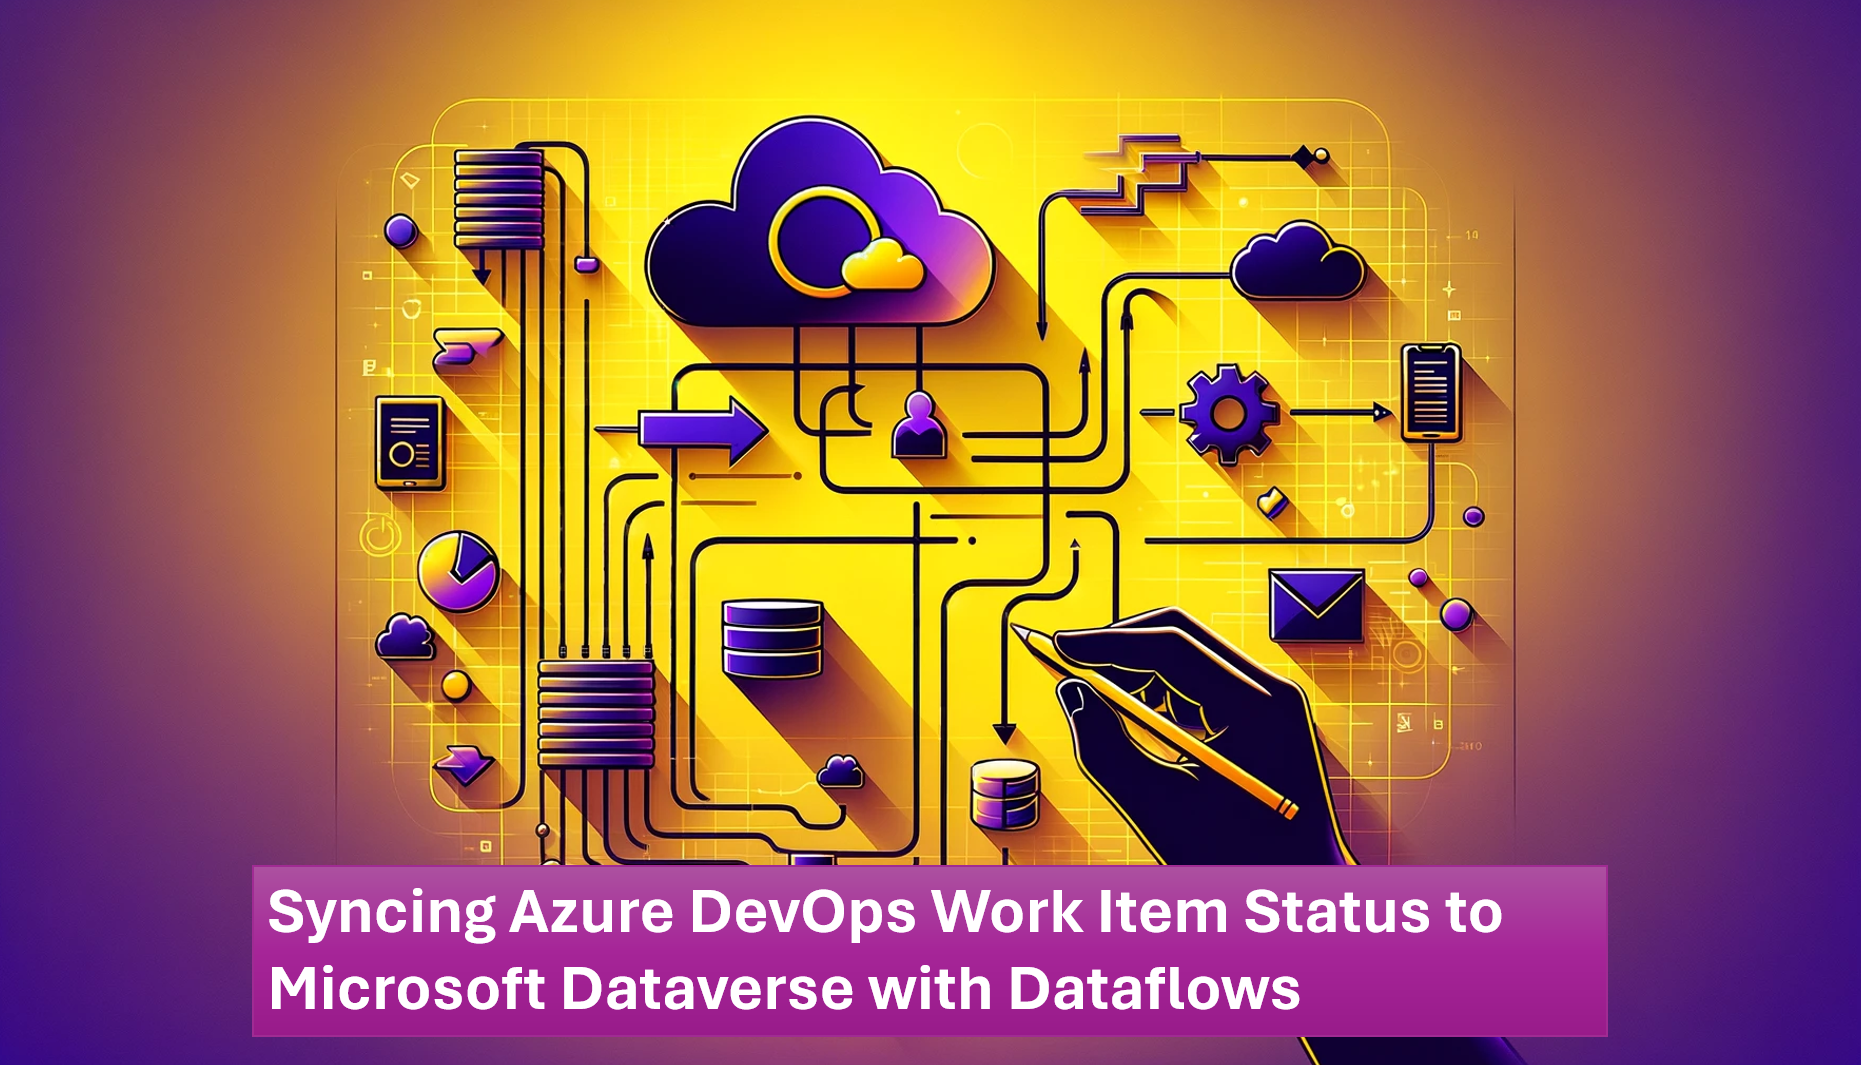 Syncing Azure DevOps Work Item Status to Microsoft Dataverse with Dataflows